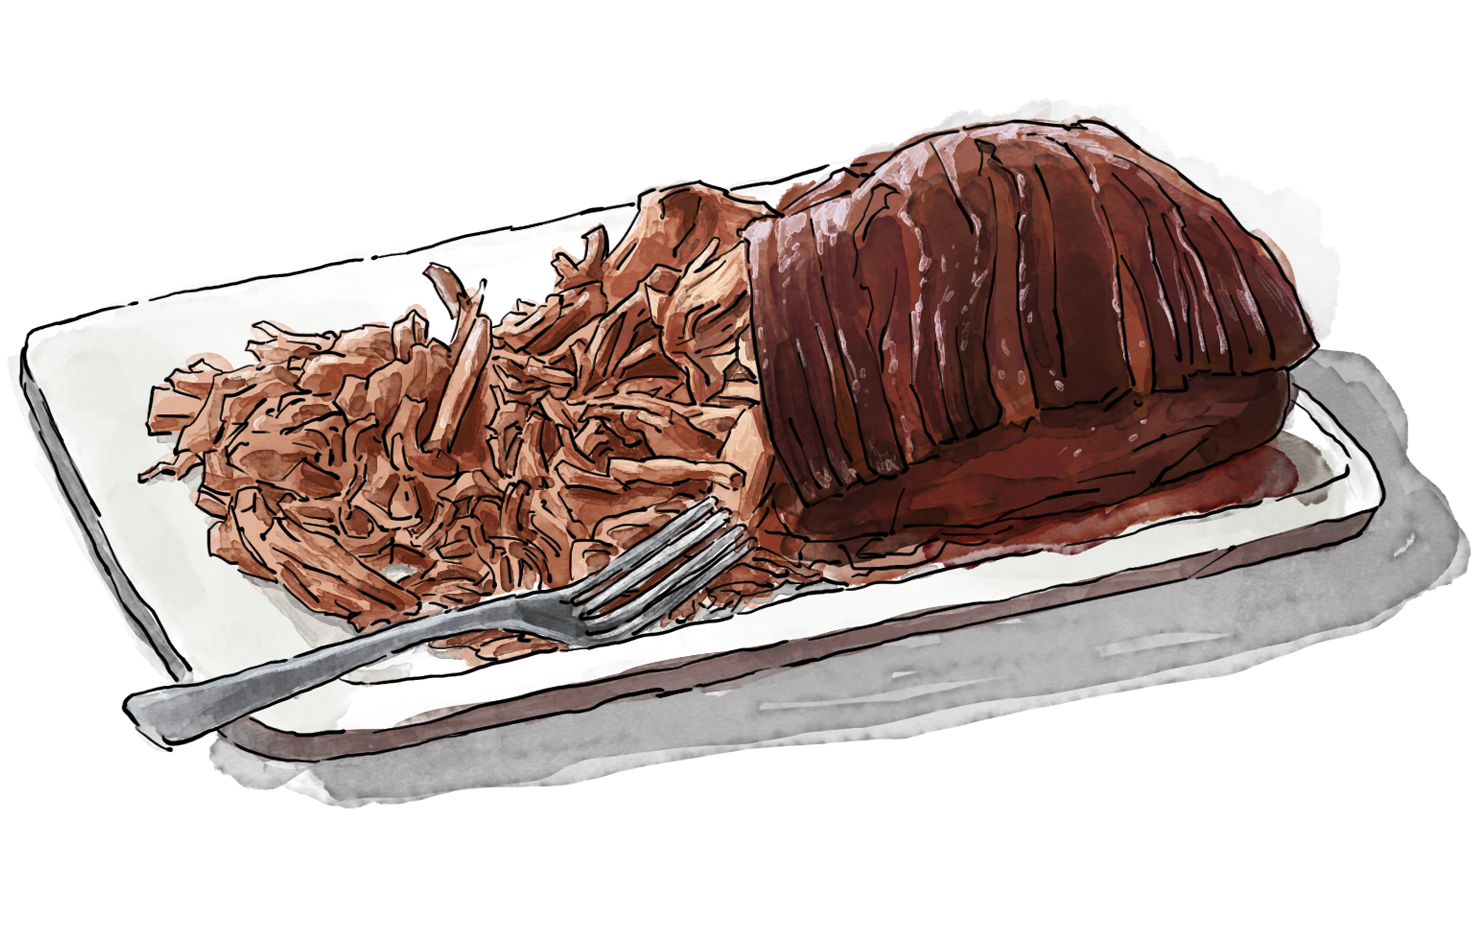 Illustration of a Low and Slow pulled Pork